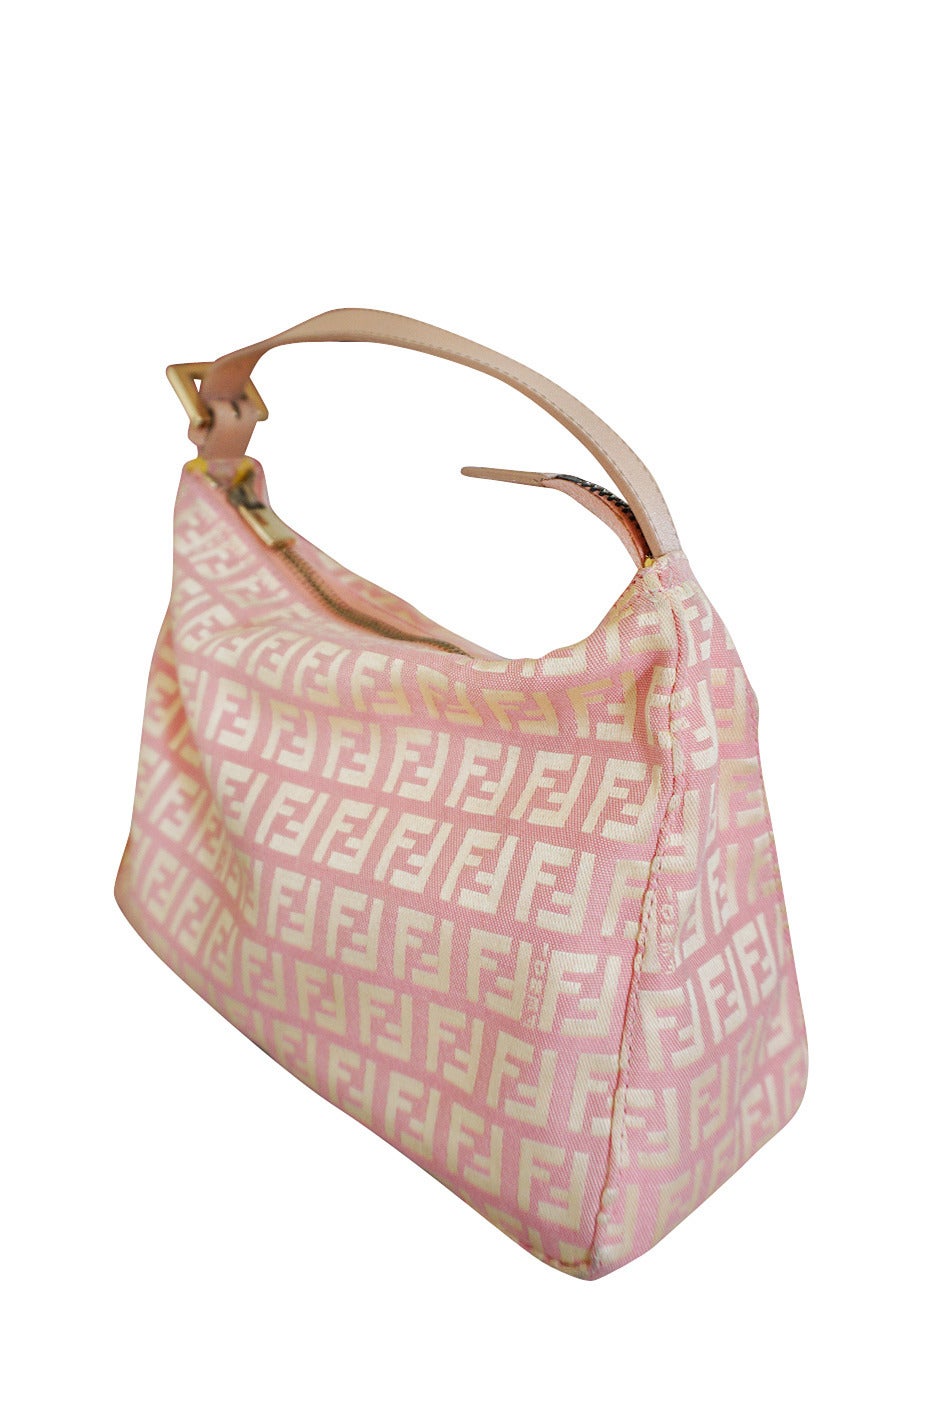 n a pretty shade of soft pink mixed with a gold toned thread woven to make the iconic Fendi logo, the exterior of this bag is instantly recognizable as being from the house of Fendi. Made of a beautiful light woven silk, this pretty little pouchette